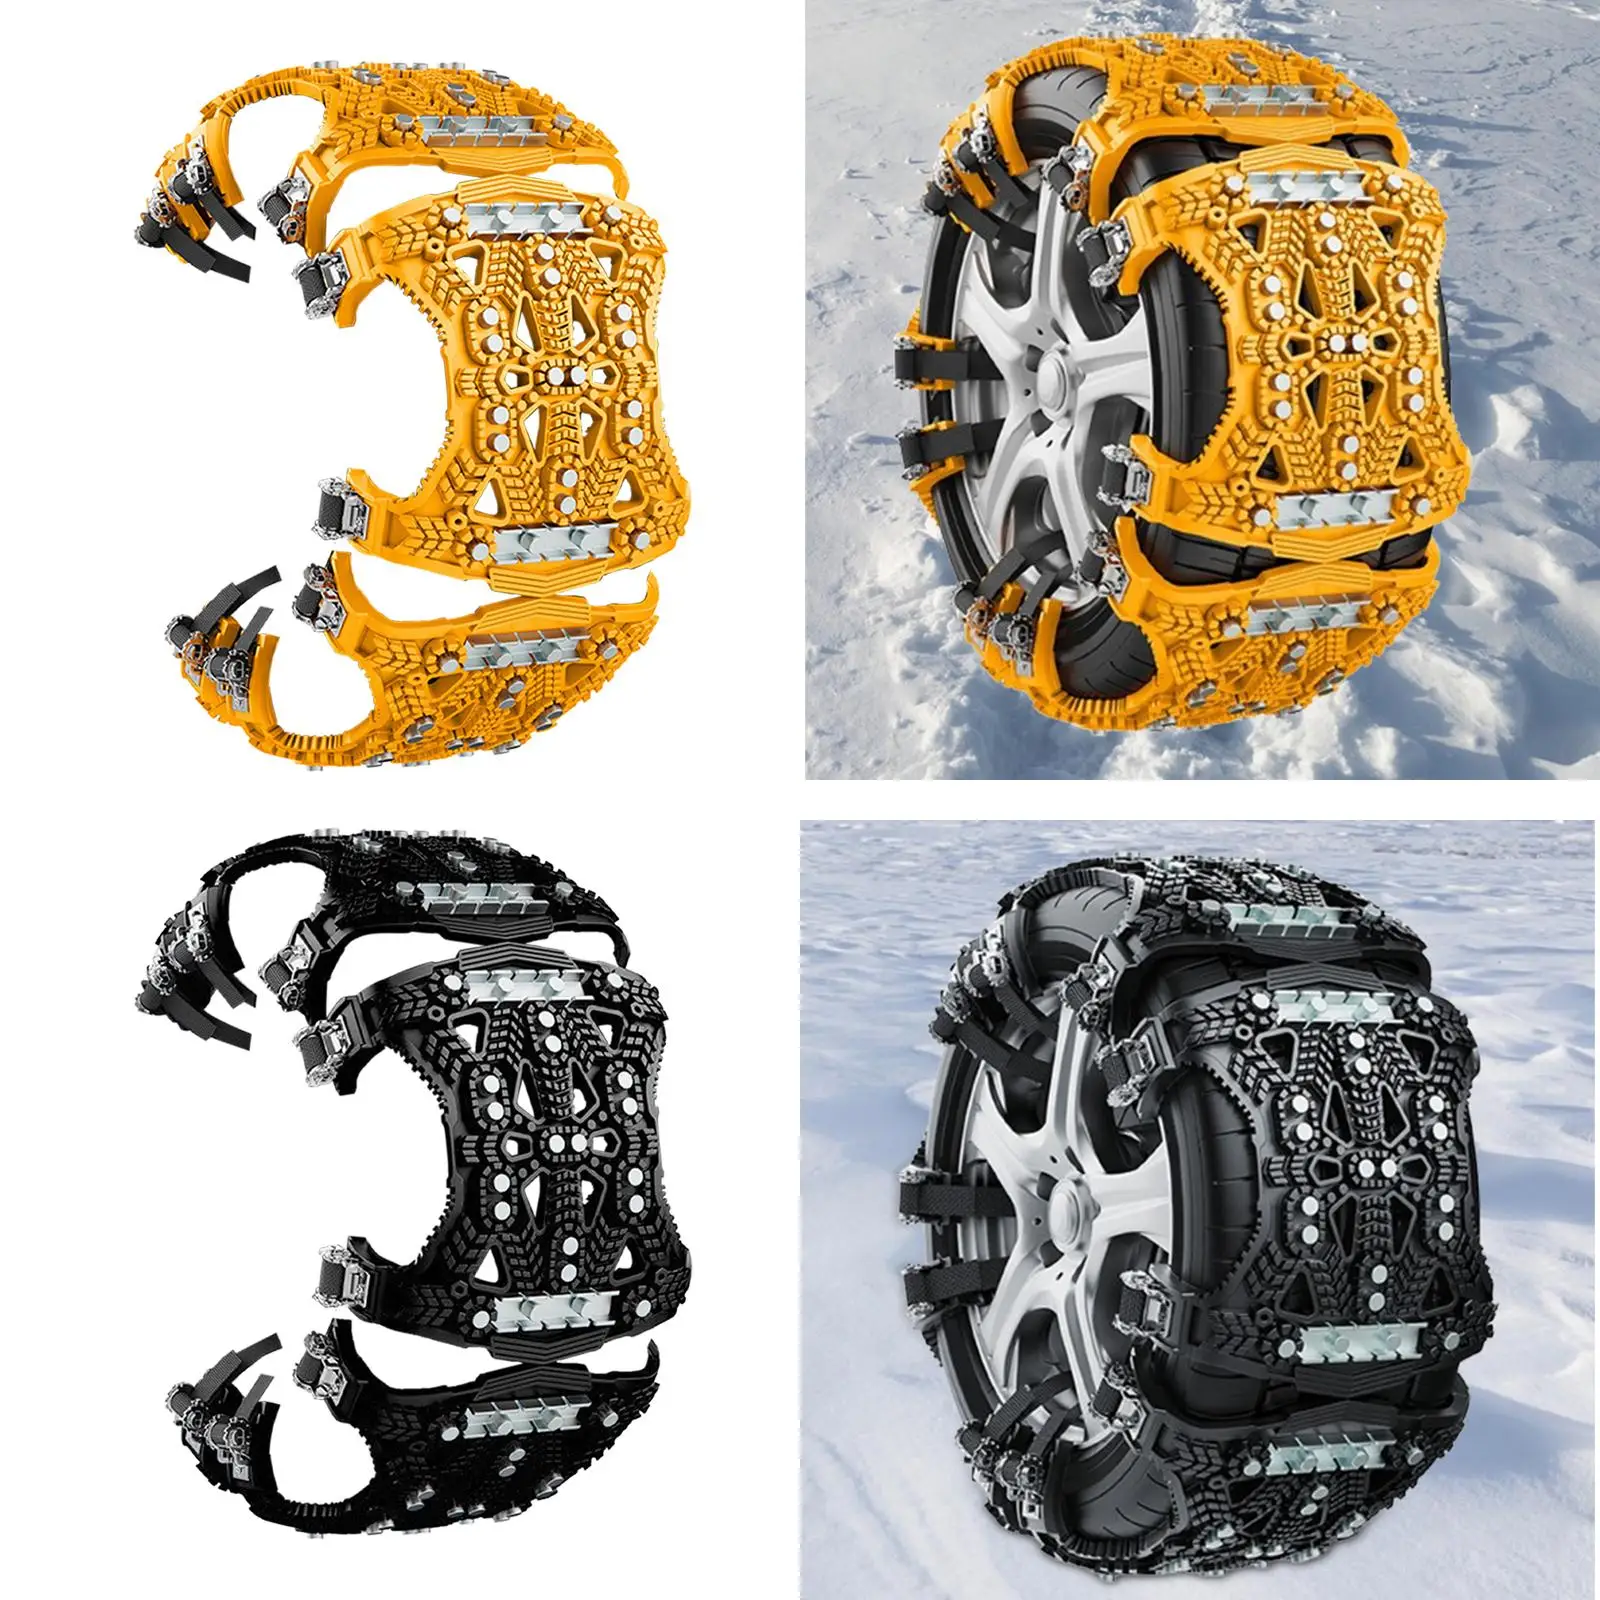 Car Tyres Anti Slip Snow Chain Anti Skid for Downhill Survival Traction